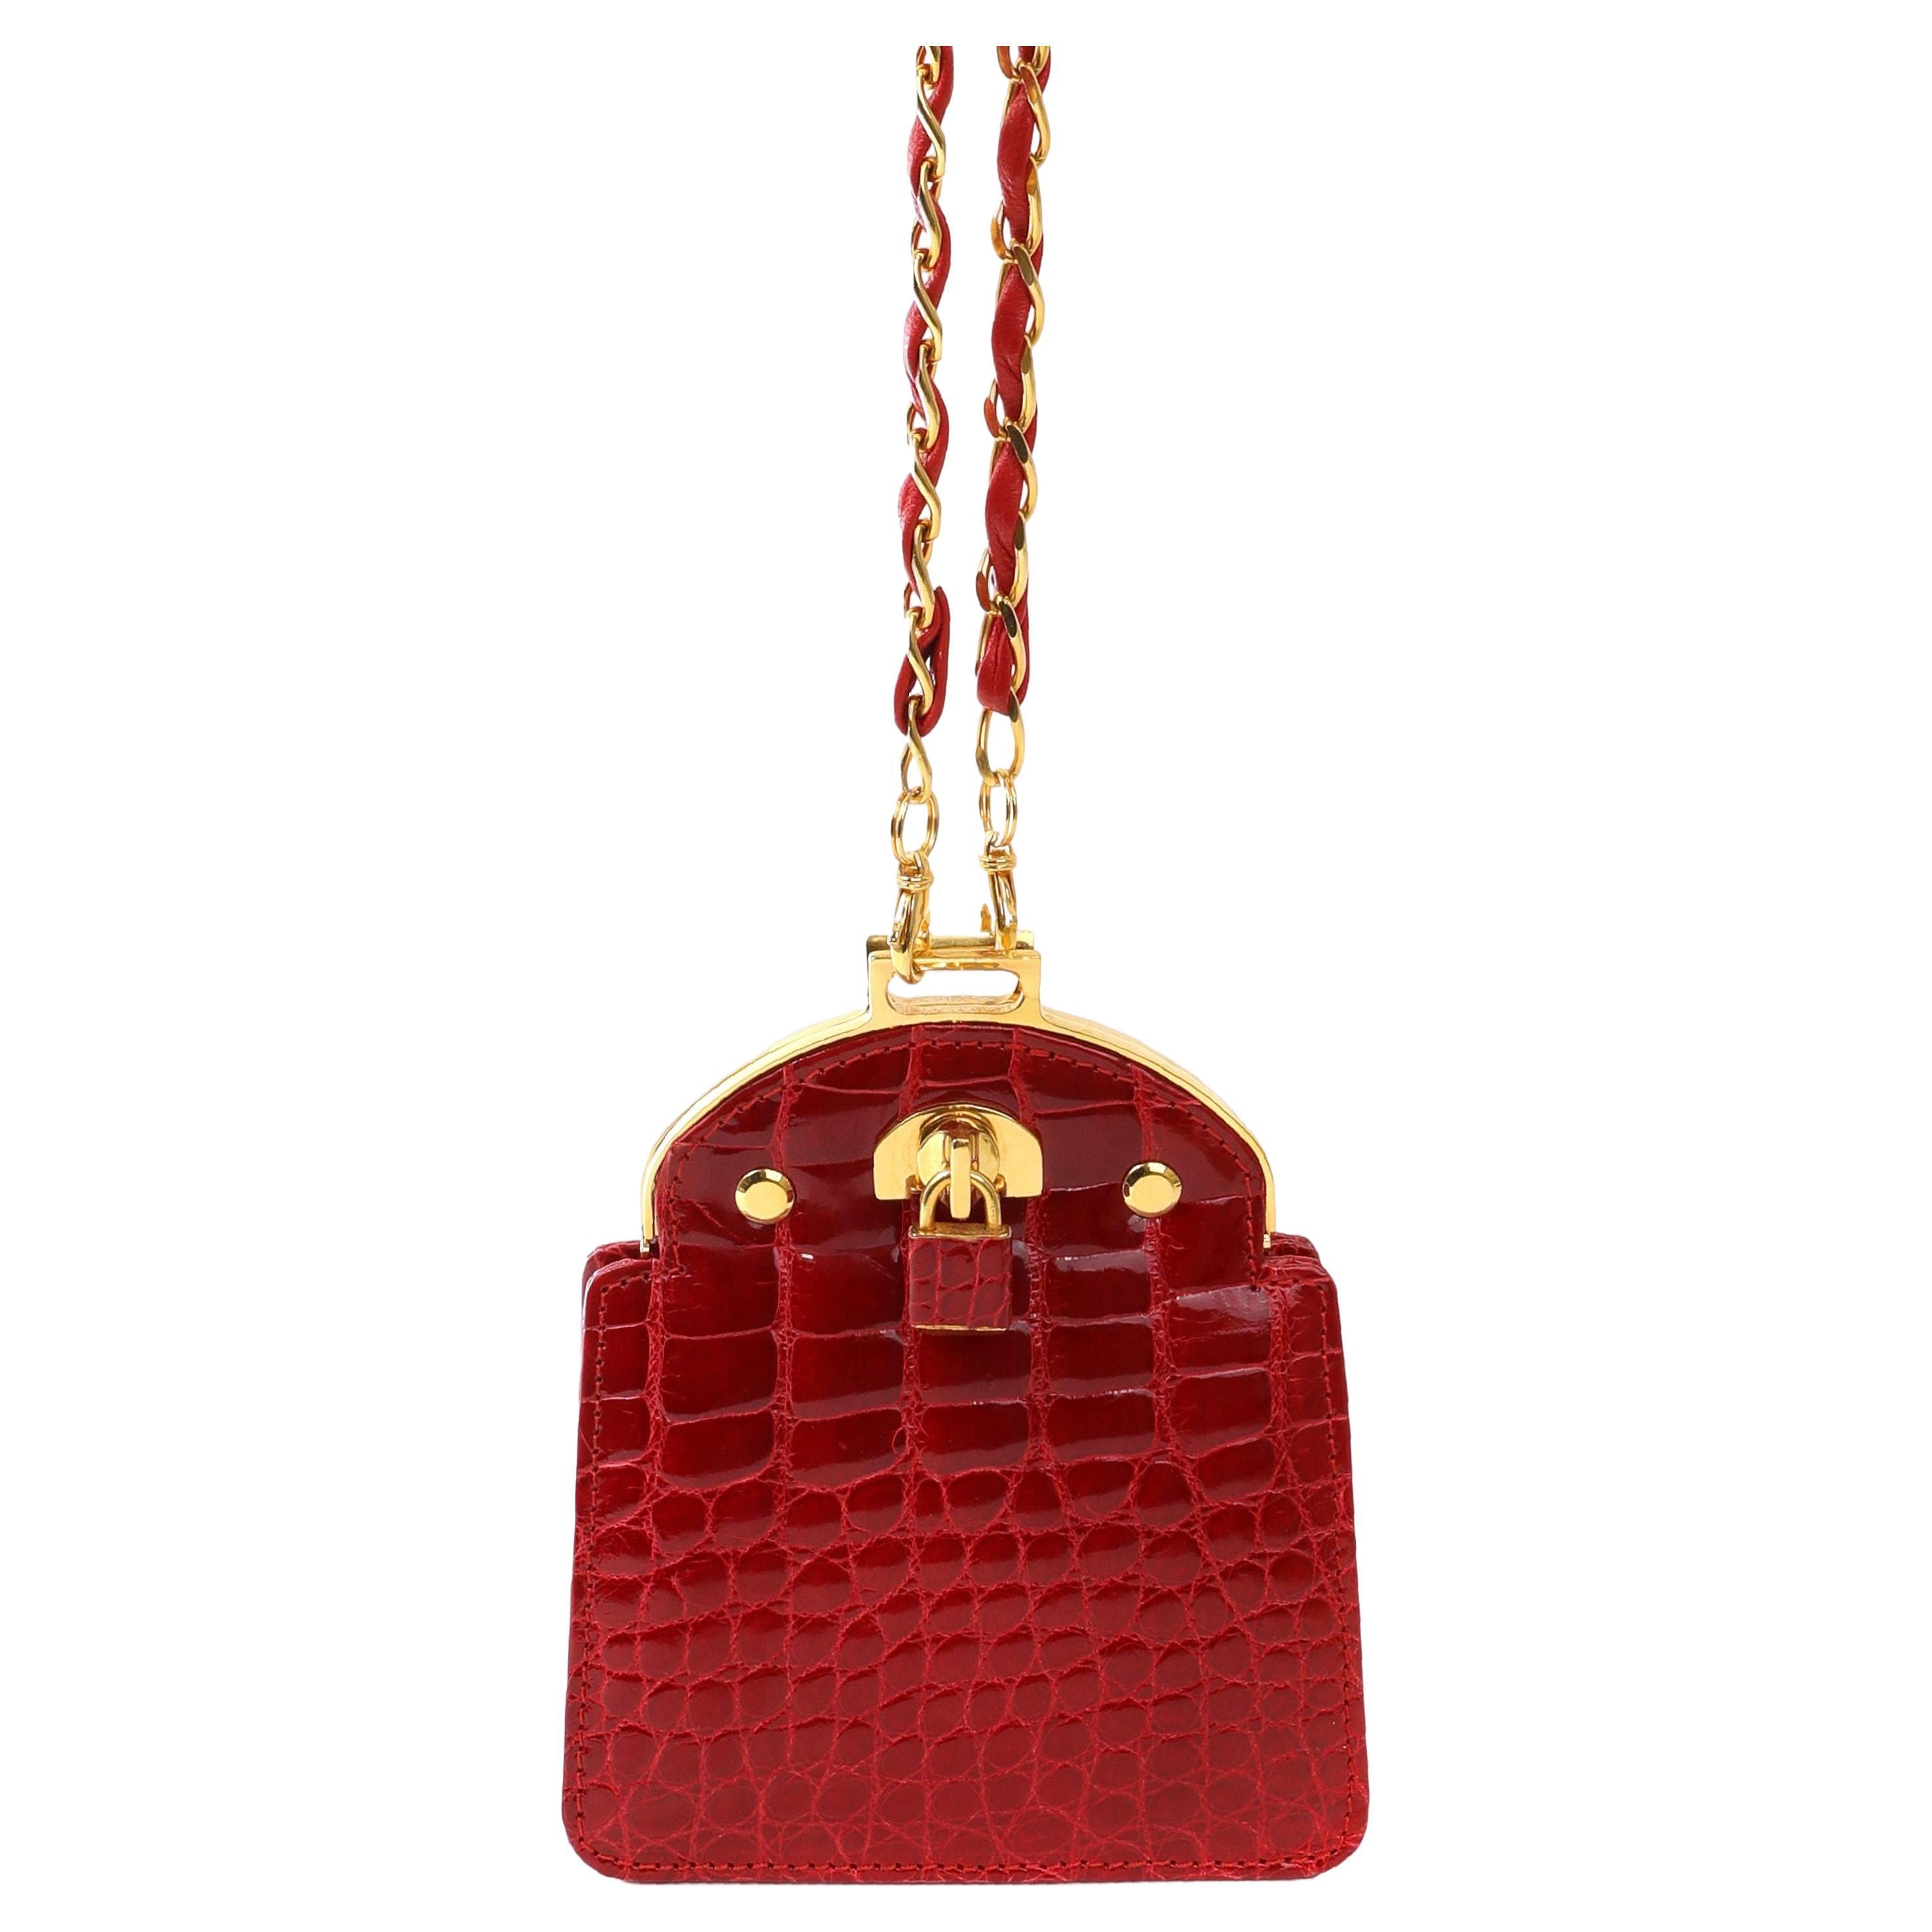  Giorgio’s Vintage Red Crocodile Mini Evening Bag with Gold Hardware For Sale